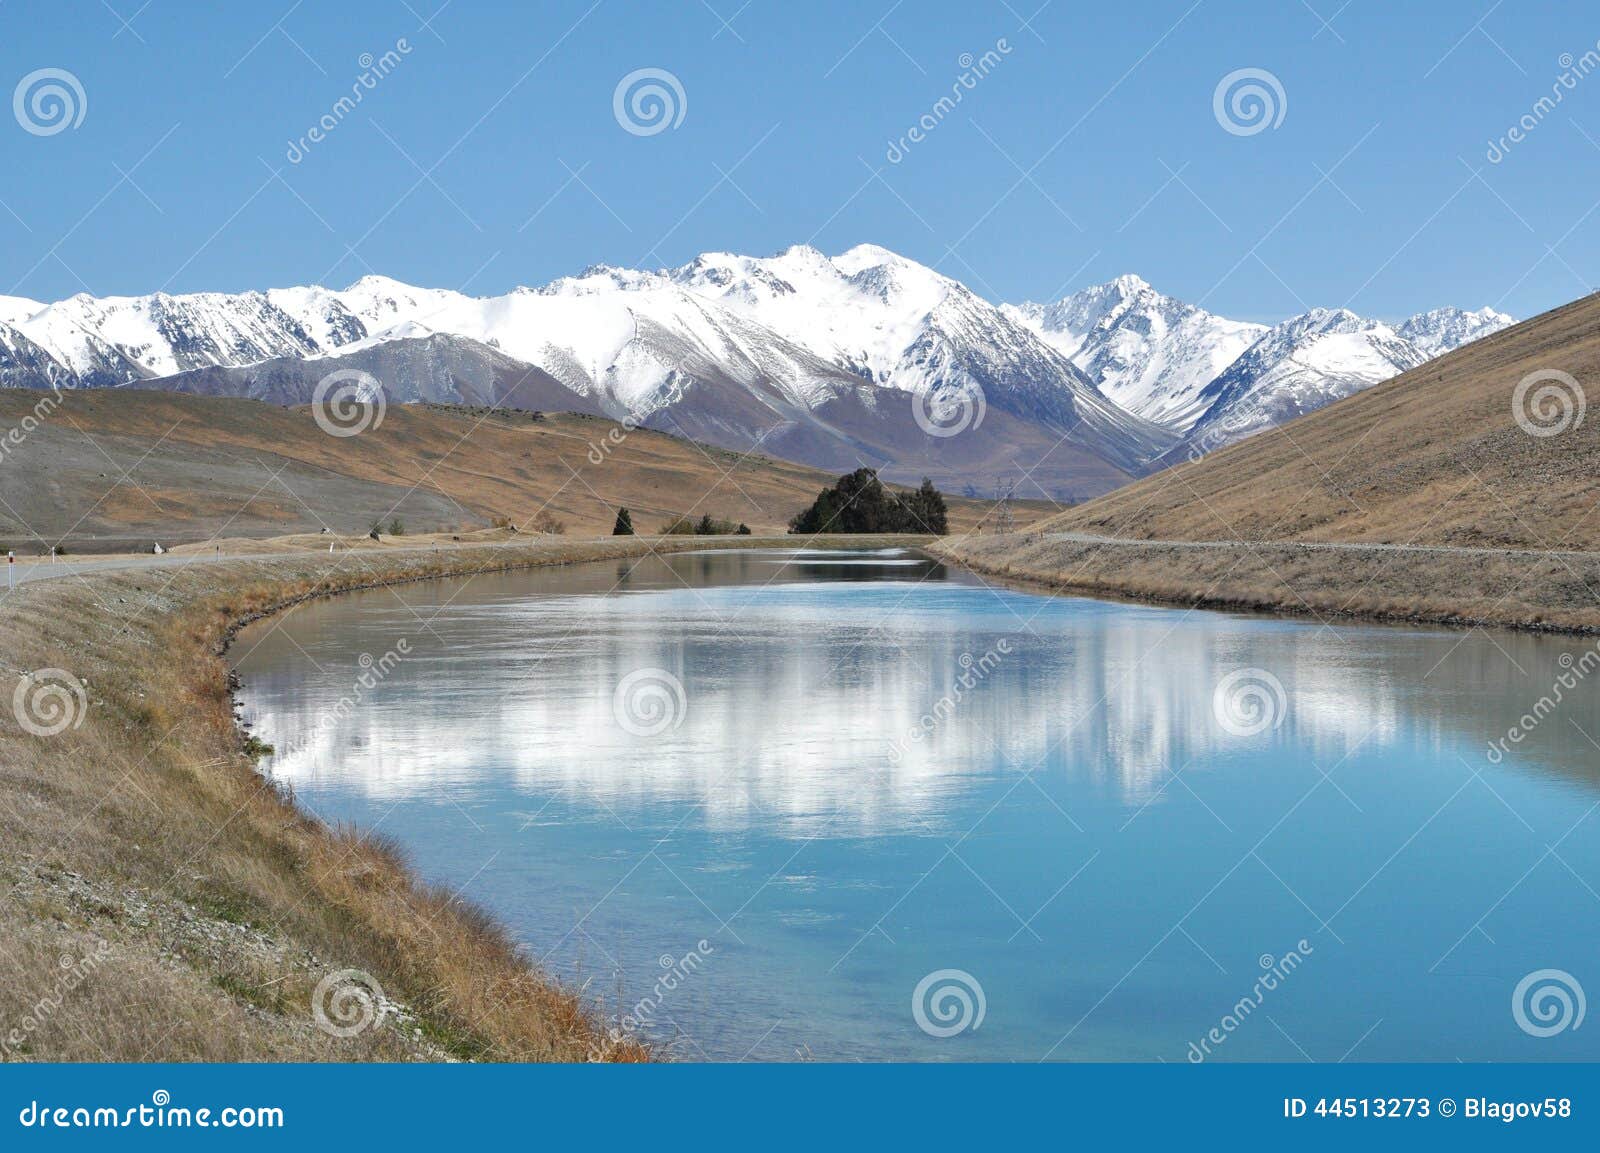 driving to mt cook. mackenzie country